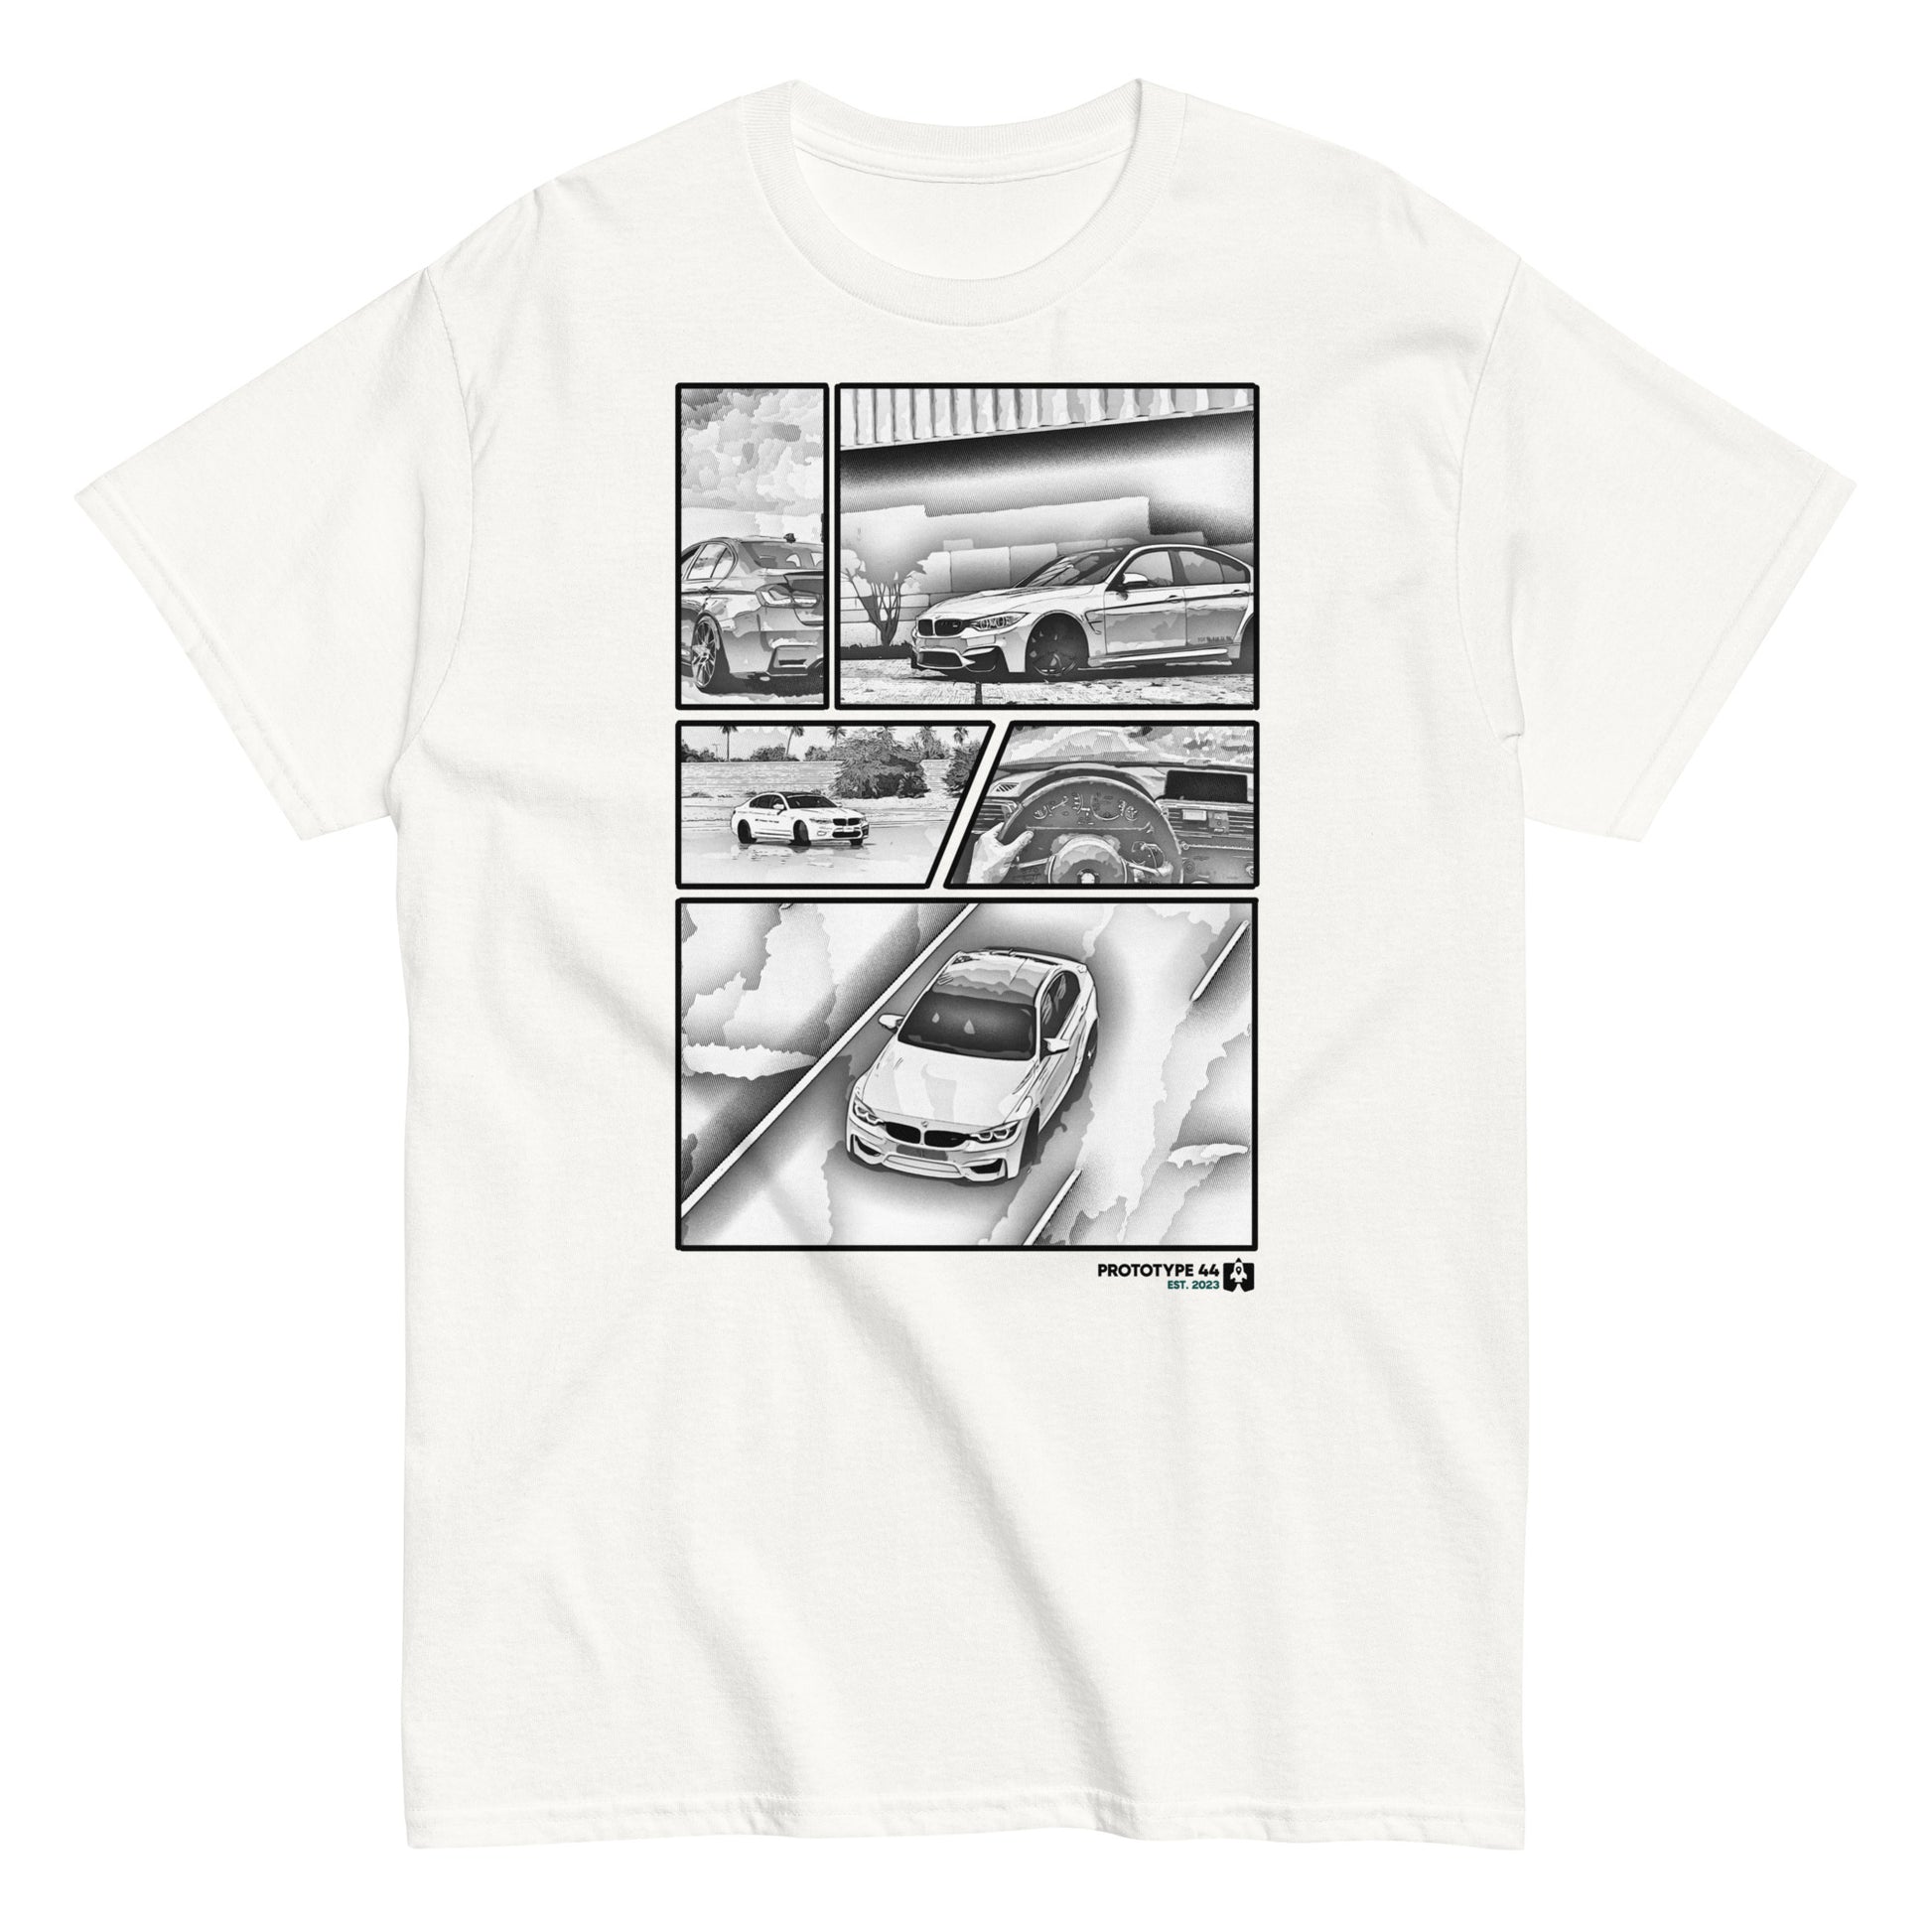 BMW M3 white t-shirt on a white surface